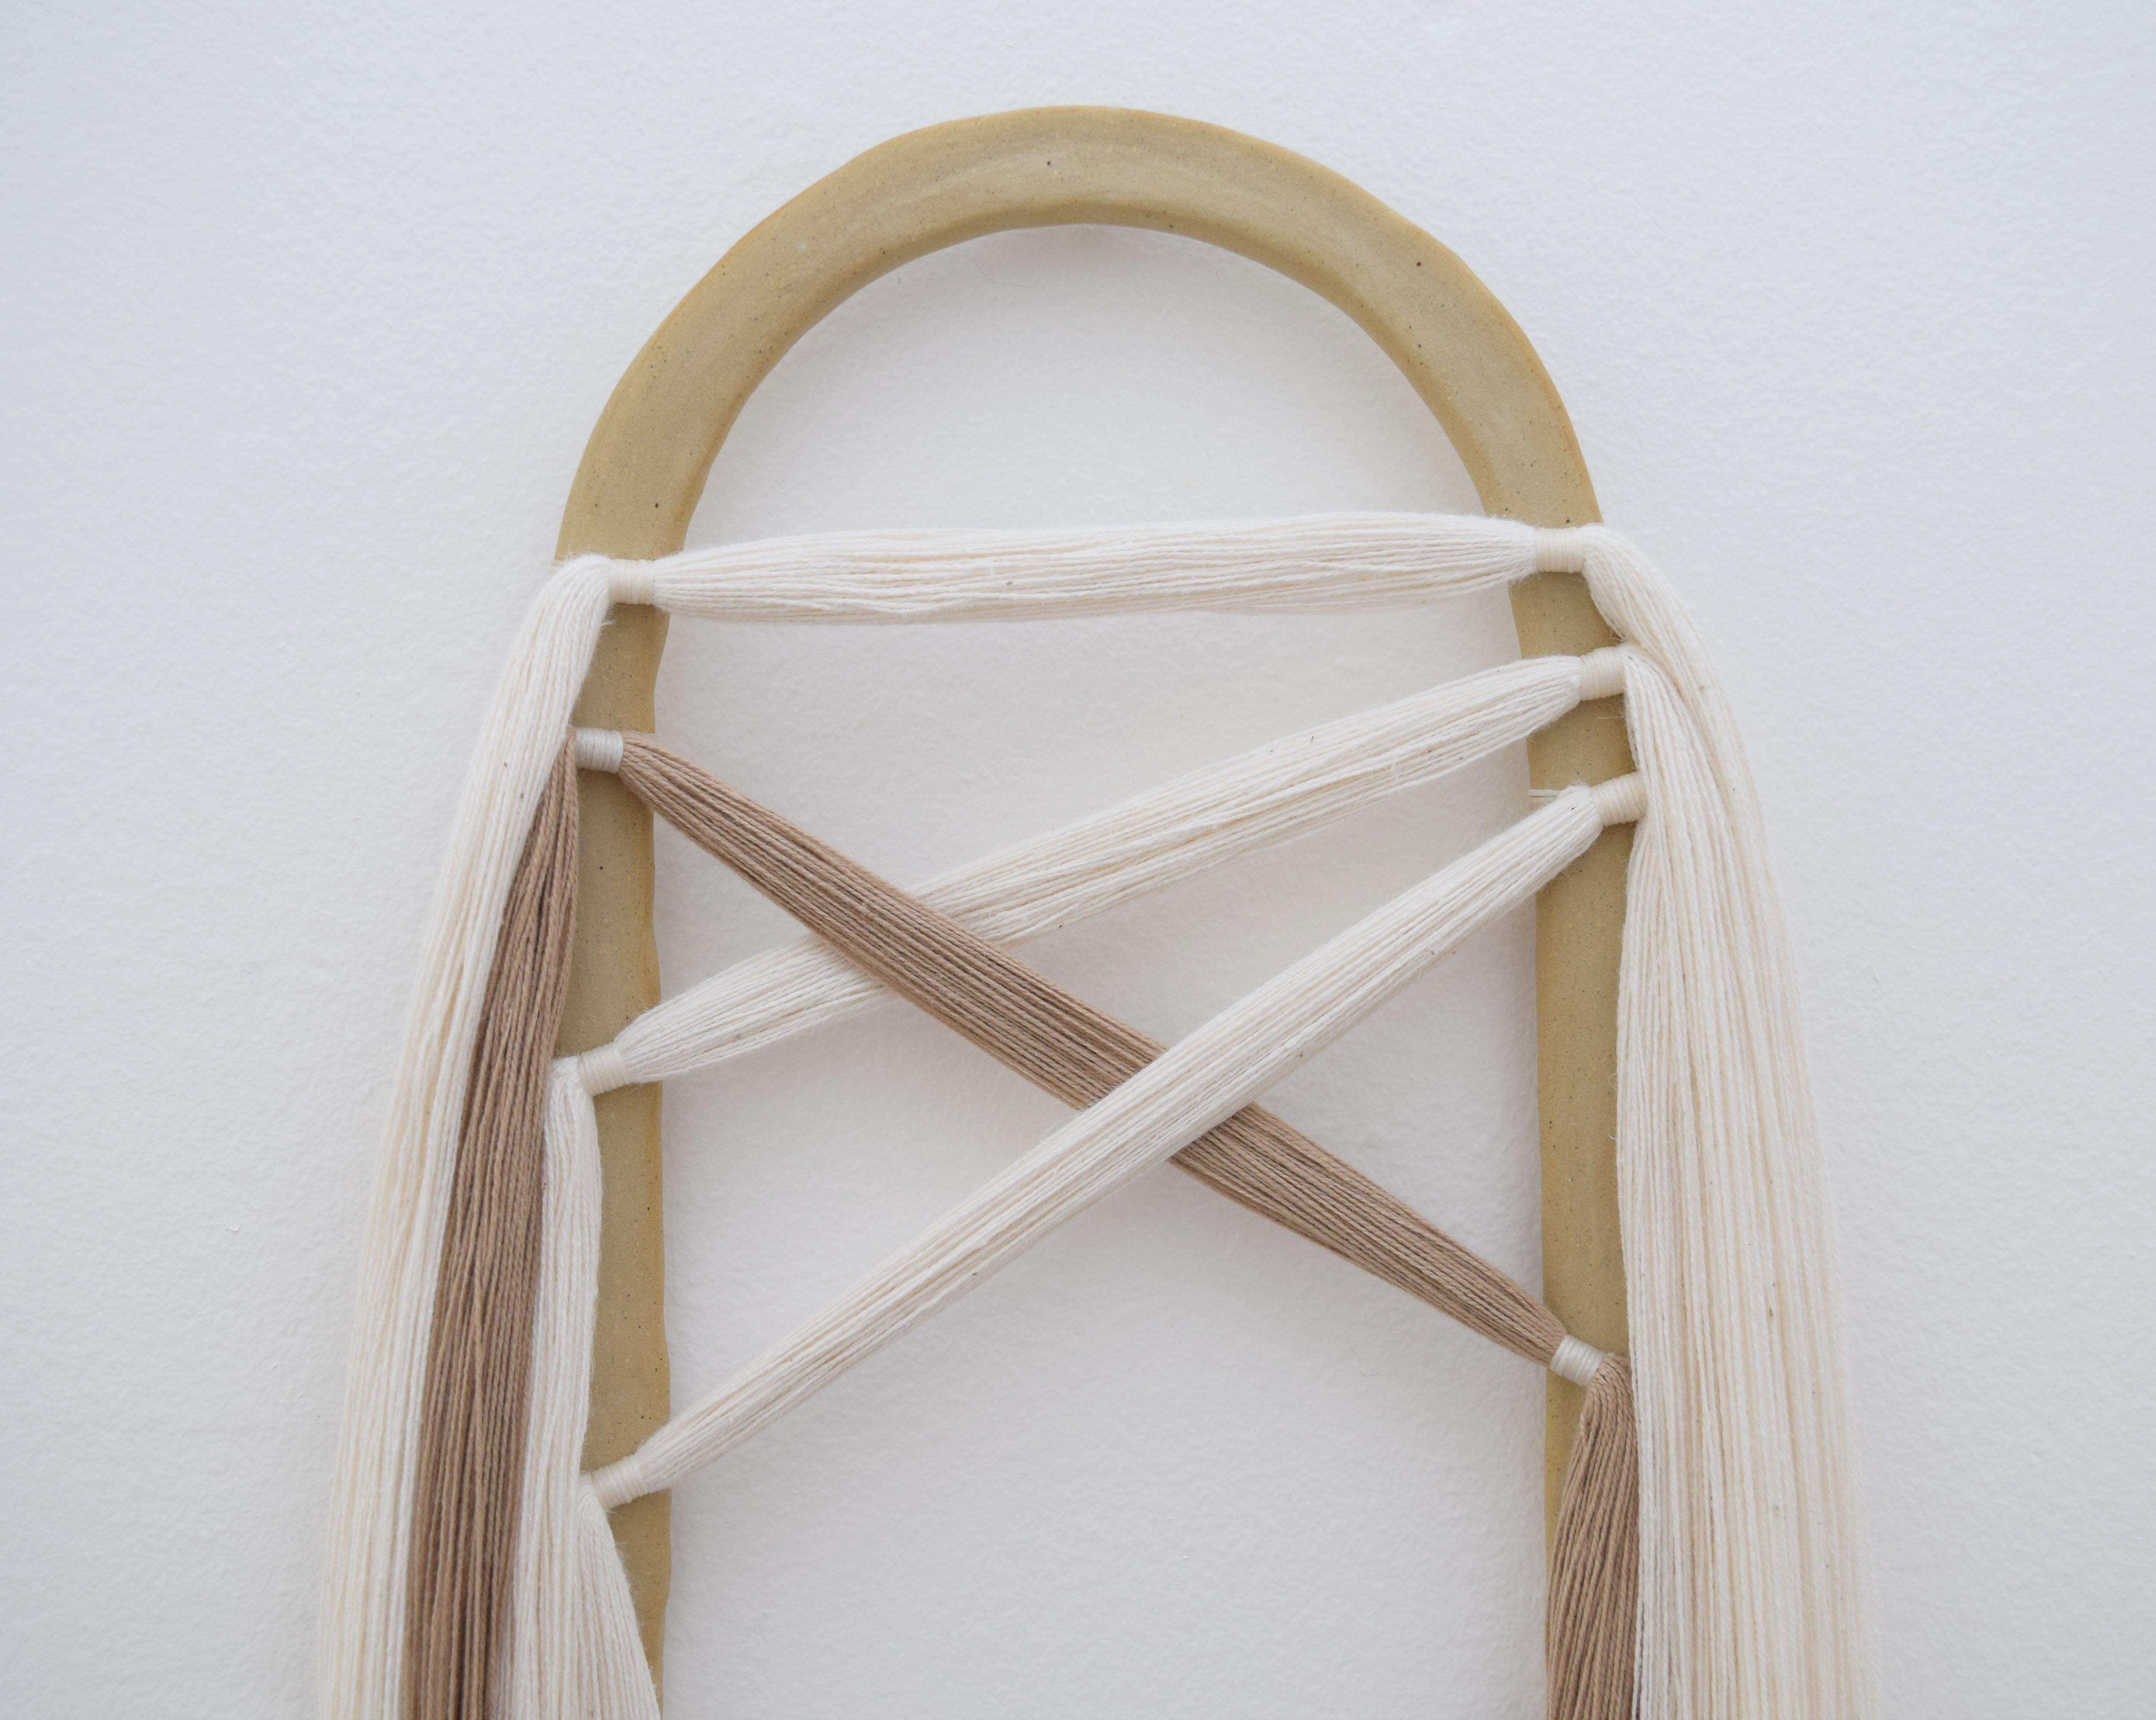 Wall sculpture #649 by Karen Gayle Tinney

Mixed material wall sculpture comprised of a ceramic panel with applied cotton fringe. The ceramic piece is hand formed out of stoneware and is left unglazed. Fringe has been hand applied to the ceramic